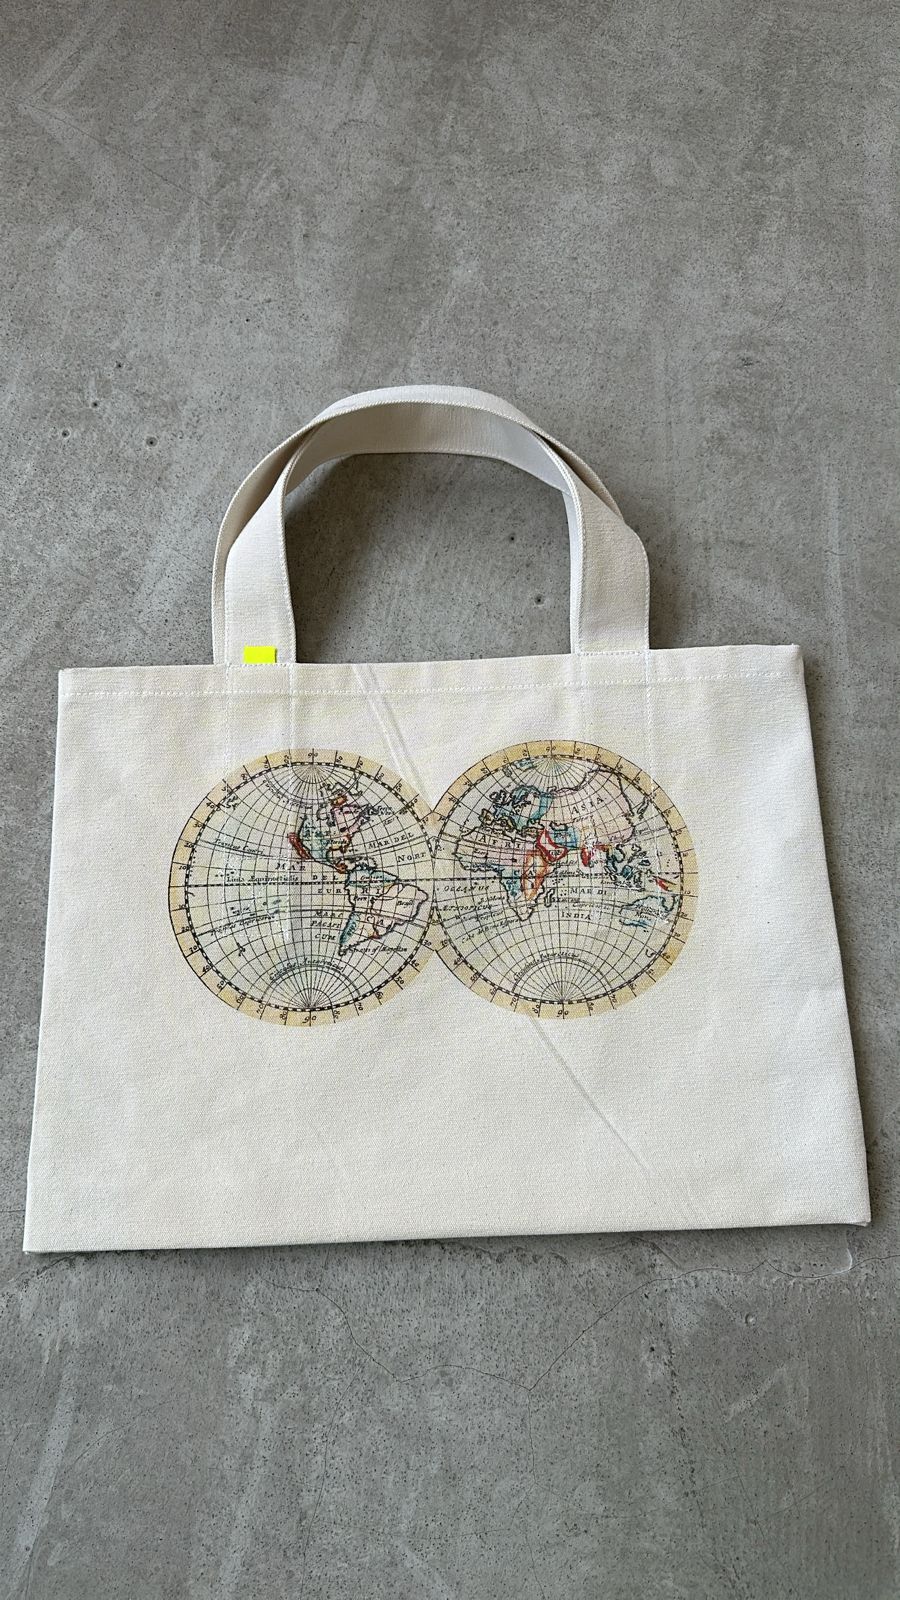 "For the Love of Travel" Canvas Tote Bag